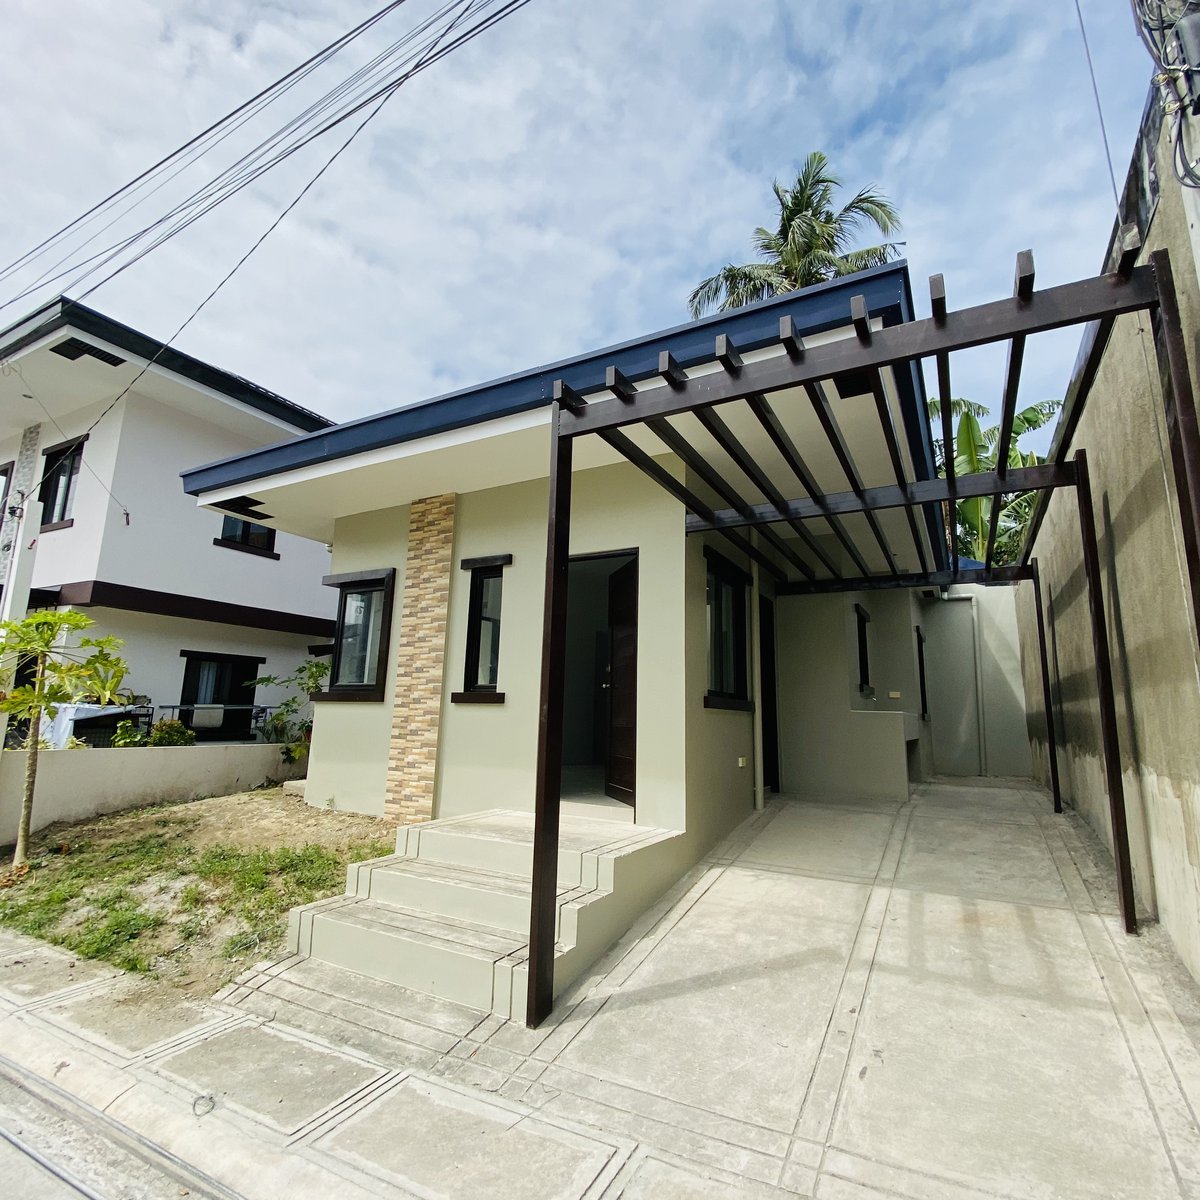 2-Bedroom Single Attached House For Sale in Lipa Batangas RFO